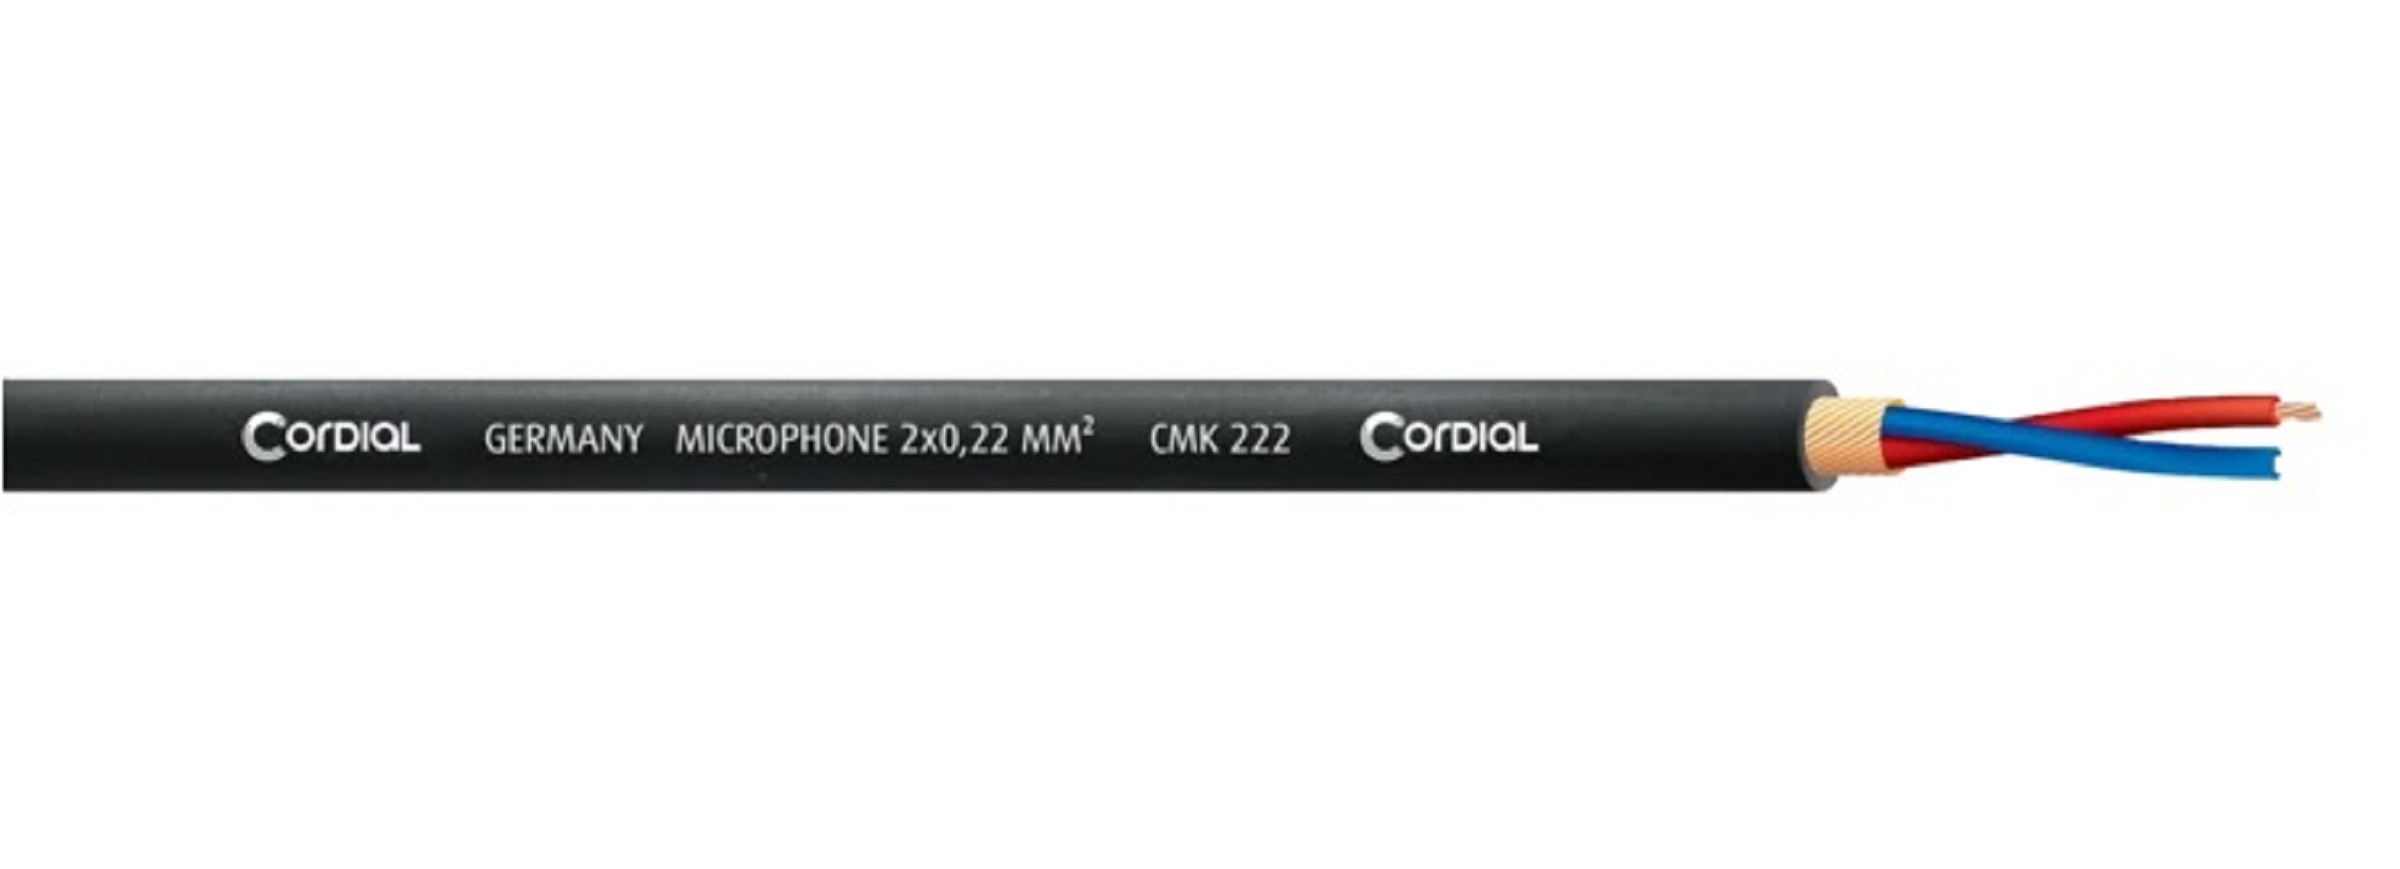 Cordial CPM 3 MP